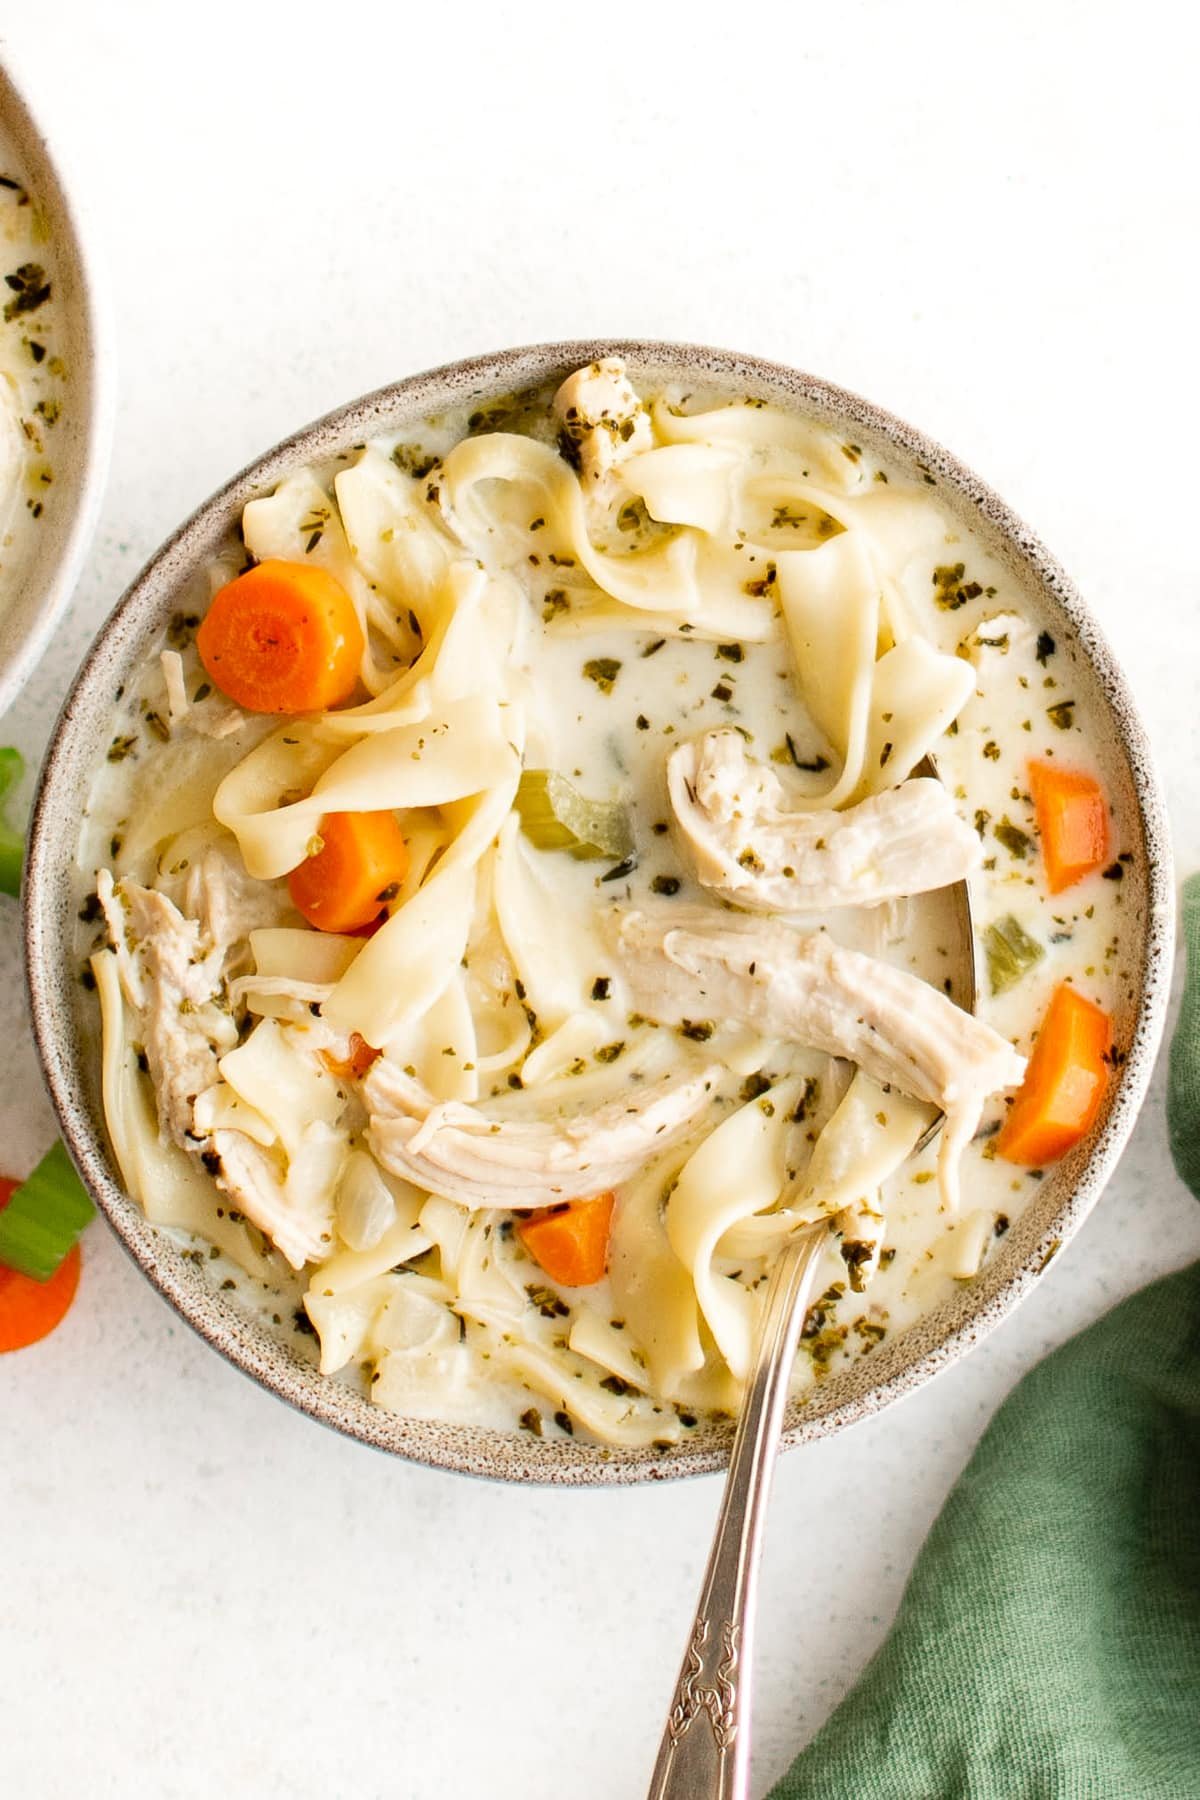 White soup bowl filled with carrots, shredded chicken, celery, and noodles, in a creamy chicken broth.